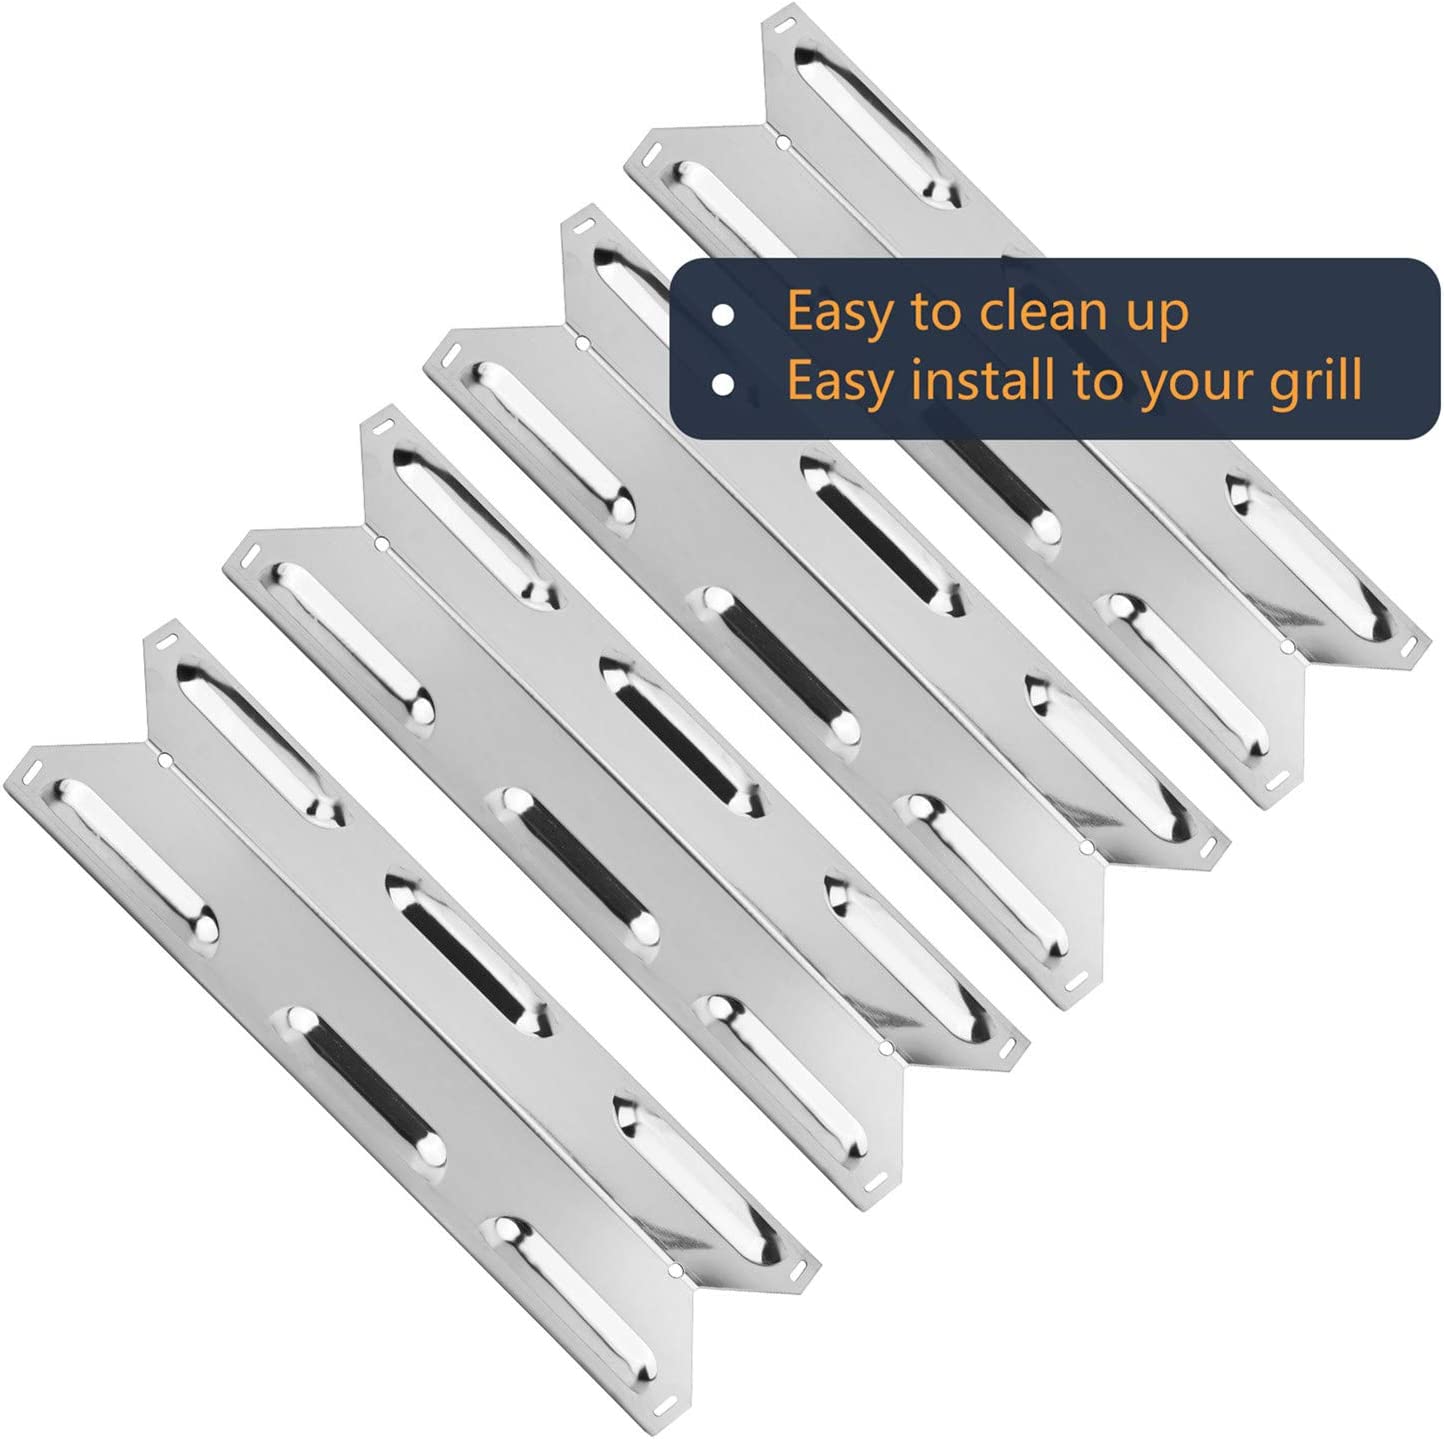 Set of four heat plates for Gas Grill Models from Char-broil, Kenmore, BBQ Pro and other manufacturers - image 3 of 5